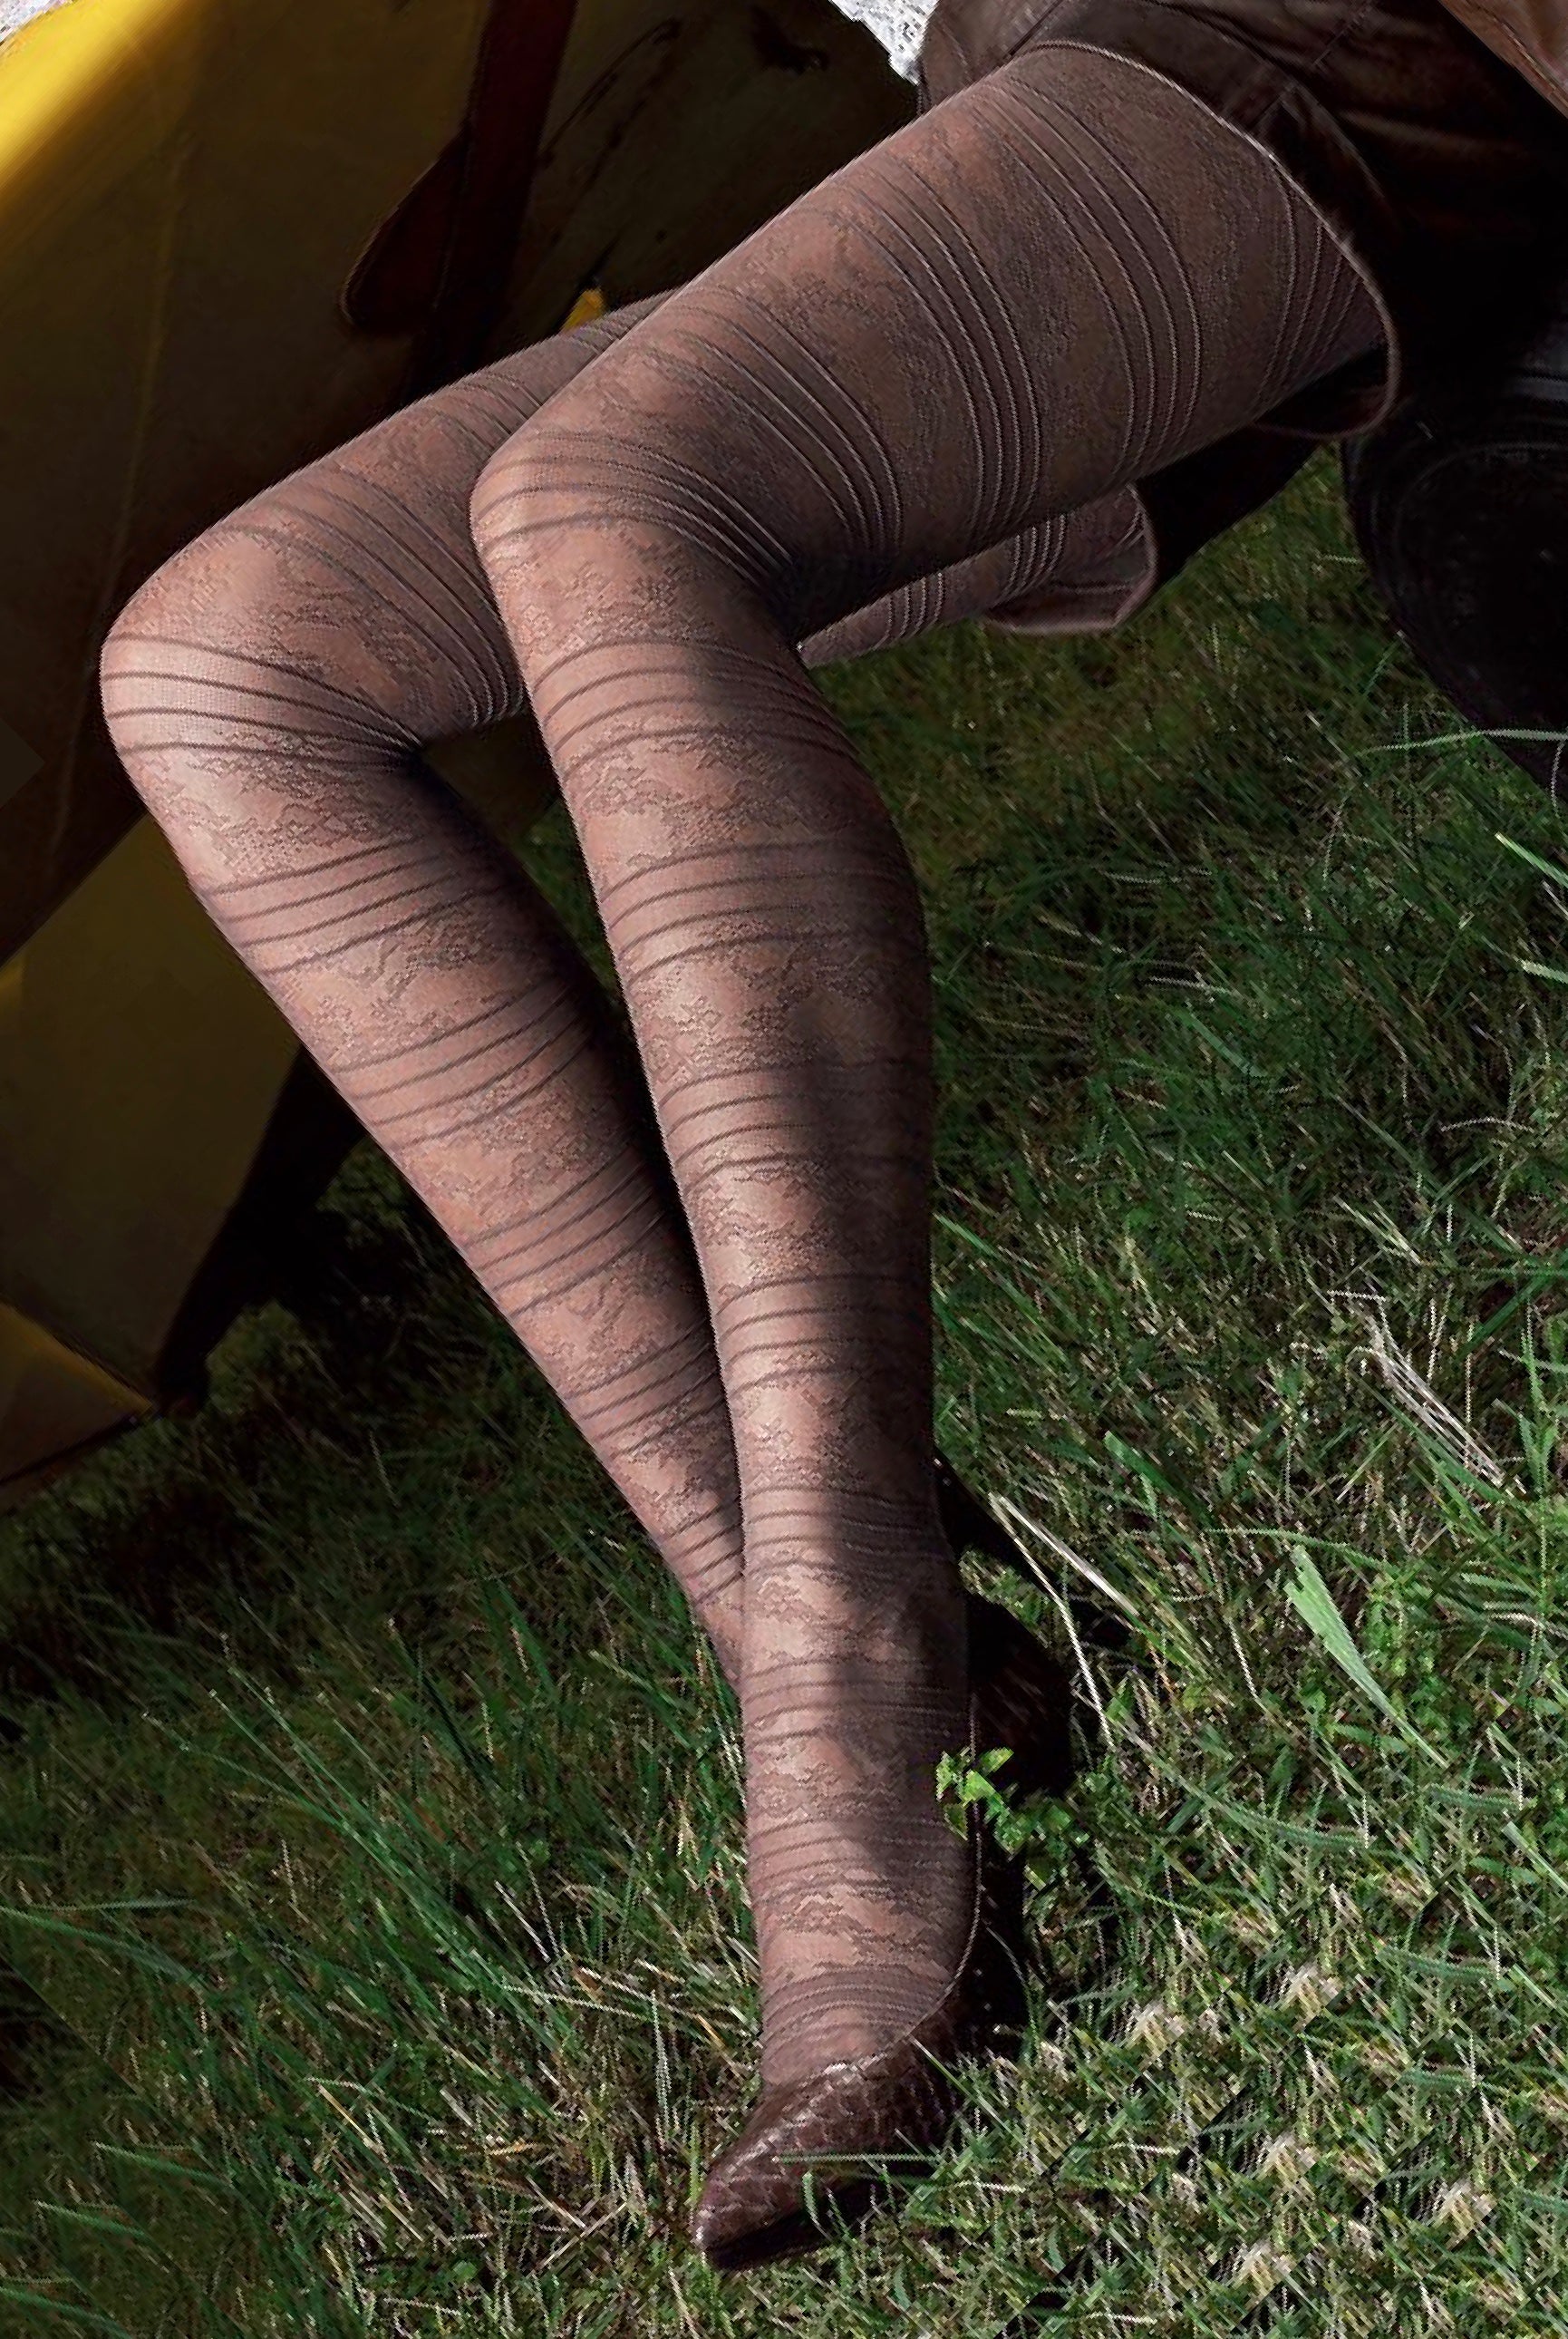 Omsa Elegantly Collant - fashion tights with floral lace and stripe pattern, available in black, navy blue and taupe.